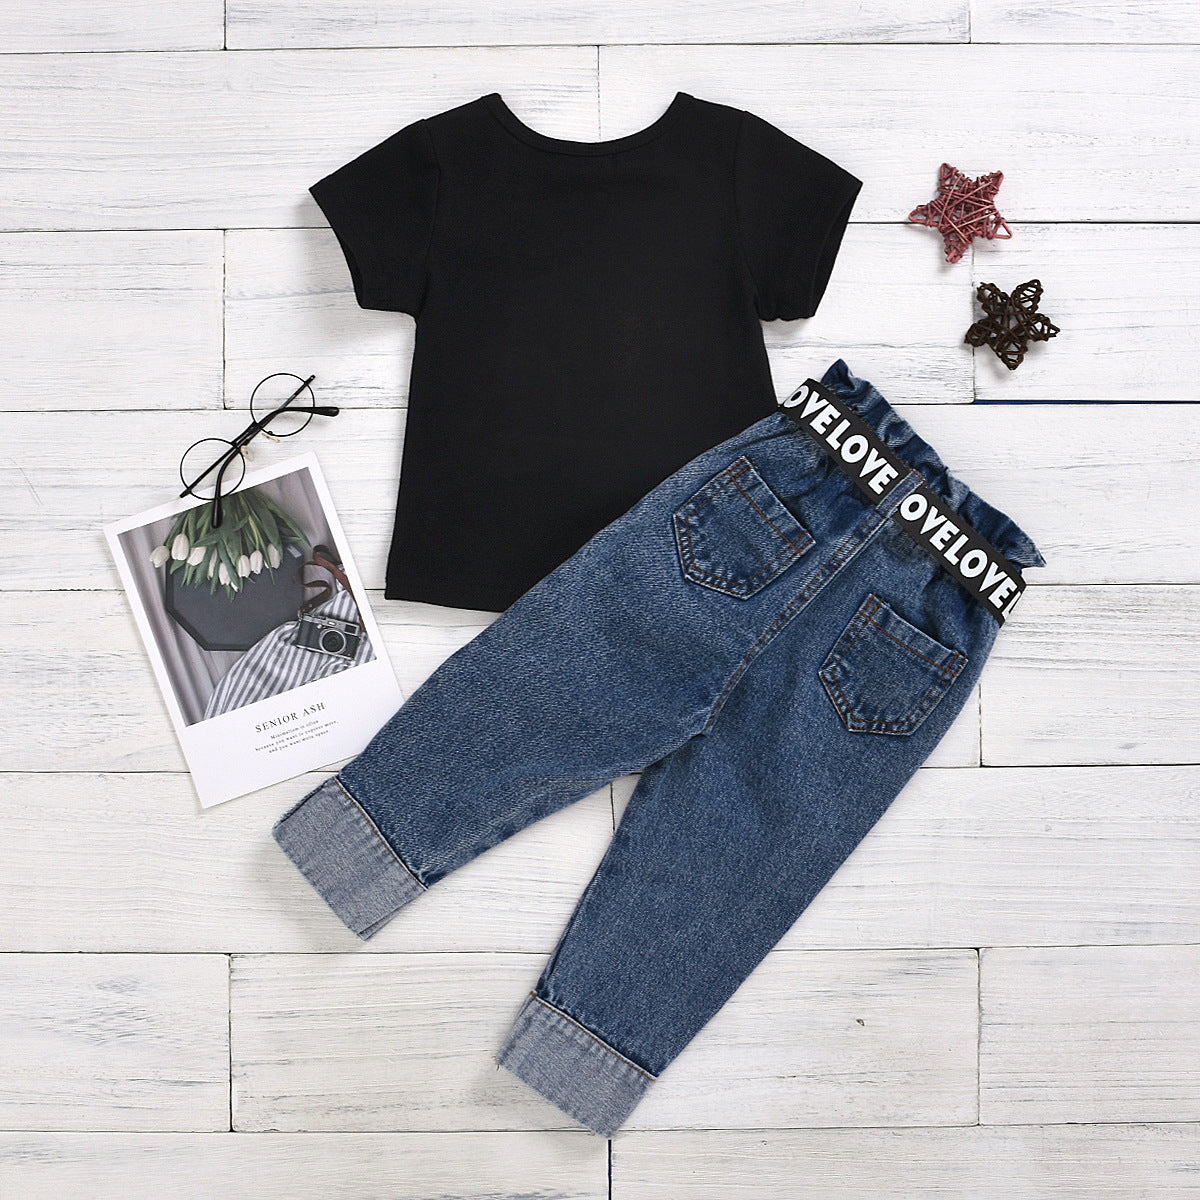 Girls' New Black "mini influencer" T-Shirt with distressed jeans and belt Set